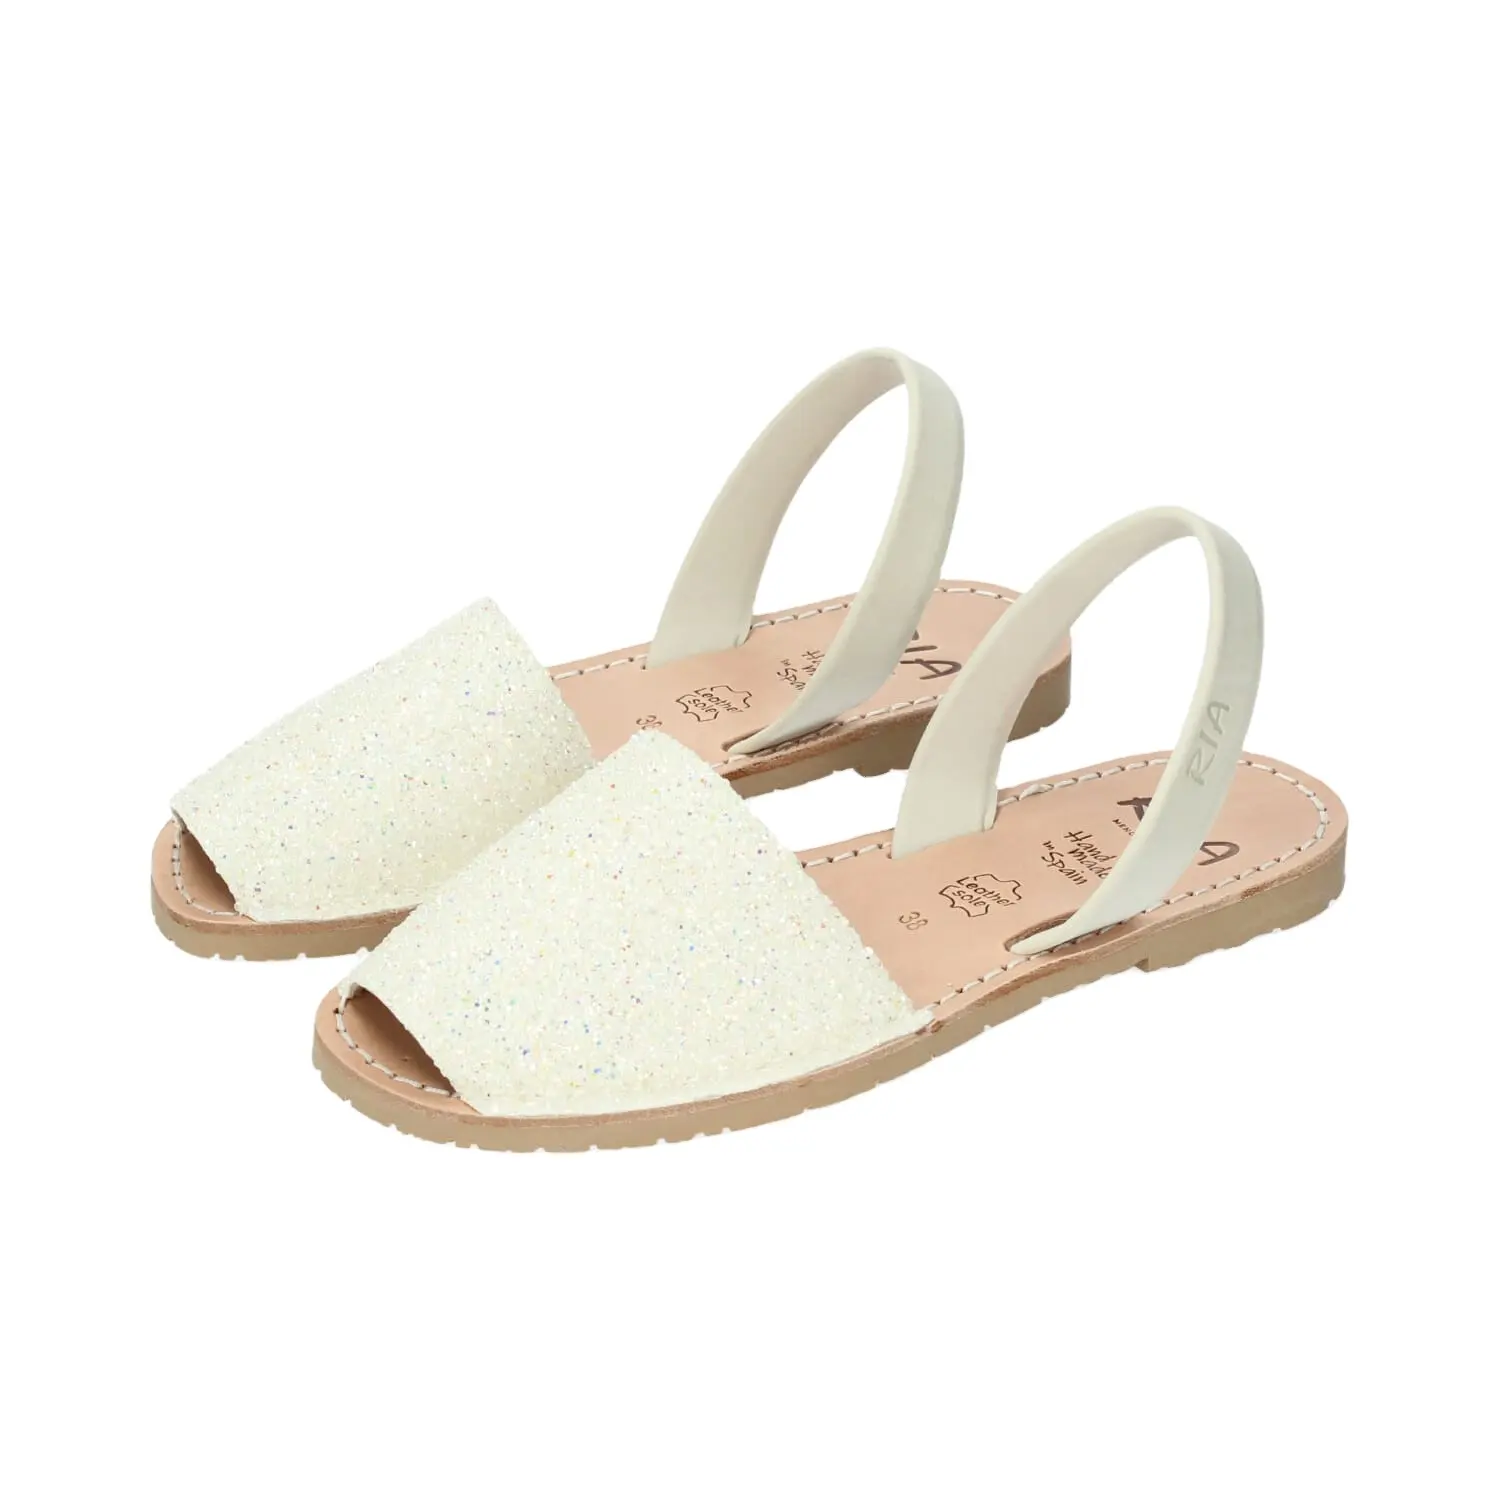 High quality handcrafted menorcan sandals made from sparkling white textile with pigskin lining and rubber sole